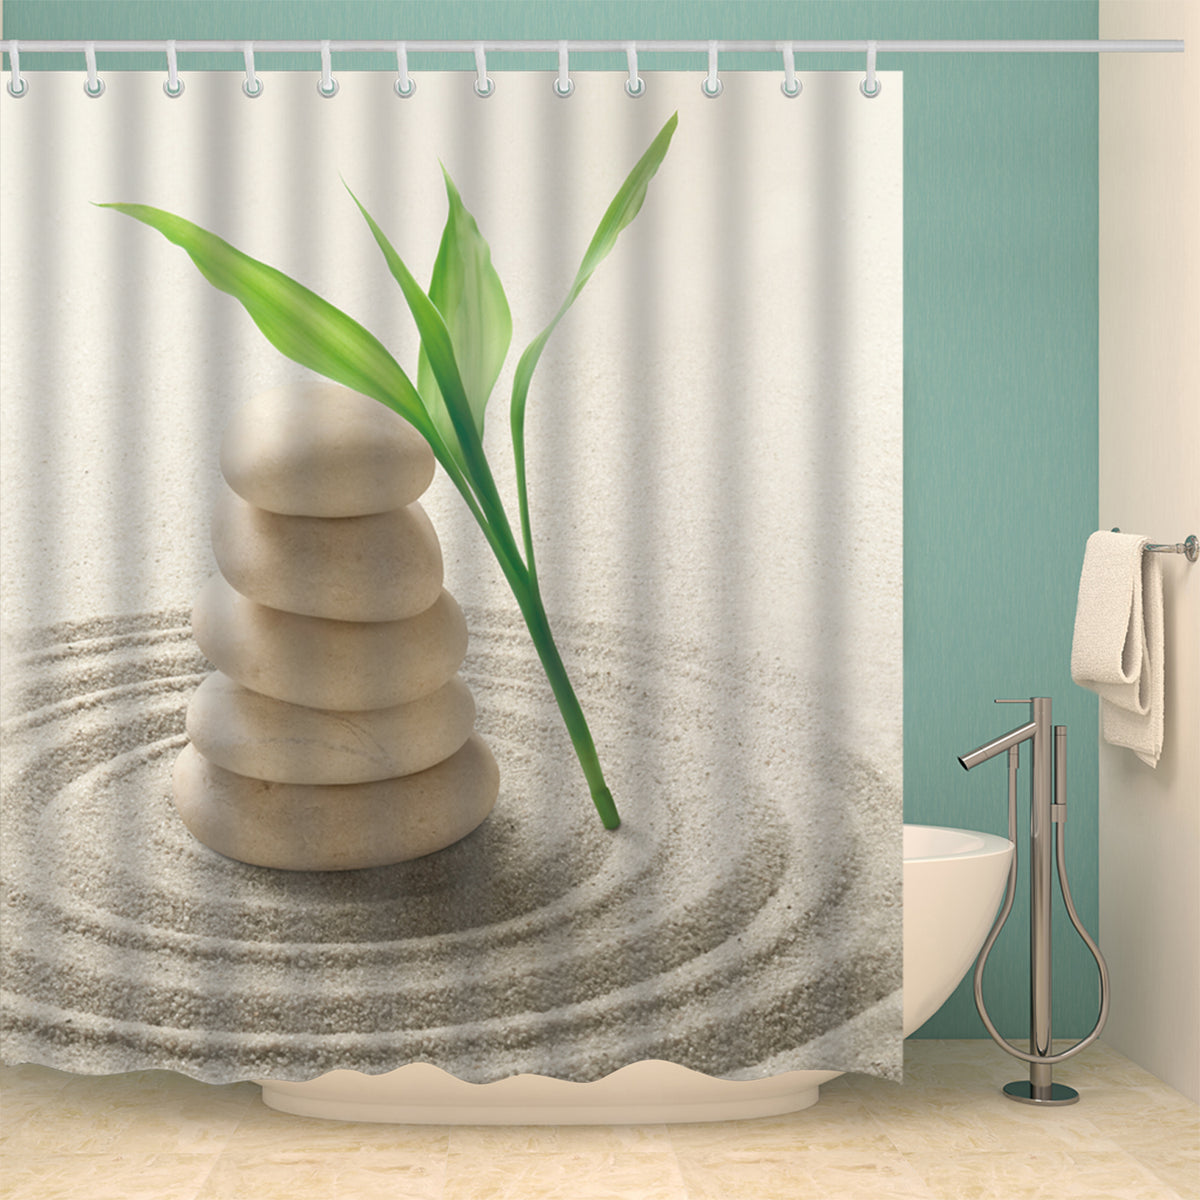 Spa Shower Curtain Meditation Stones Bamboo Print for Bathroom 70 Inches Long